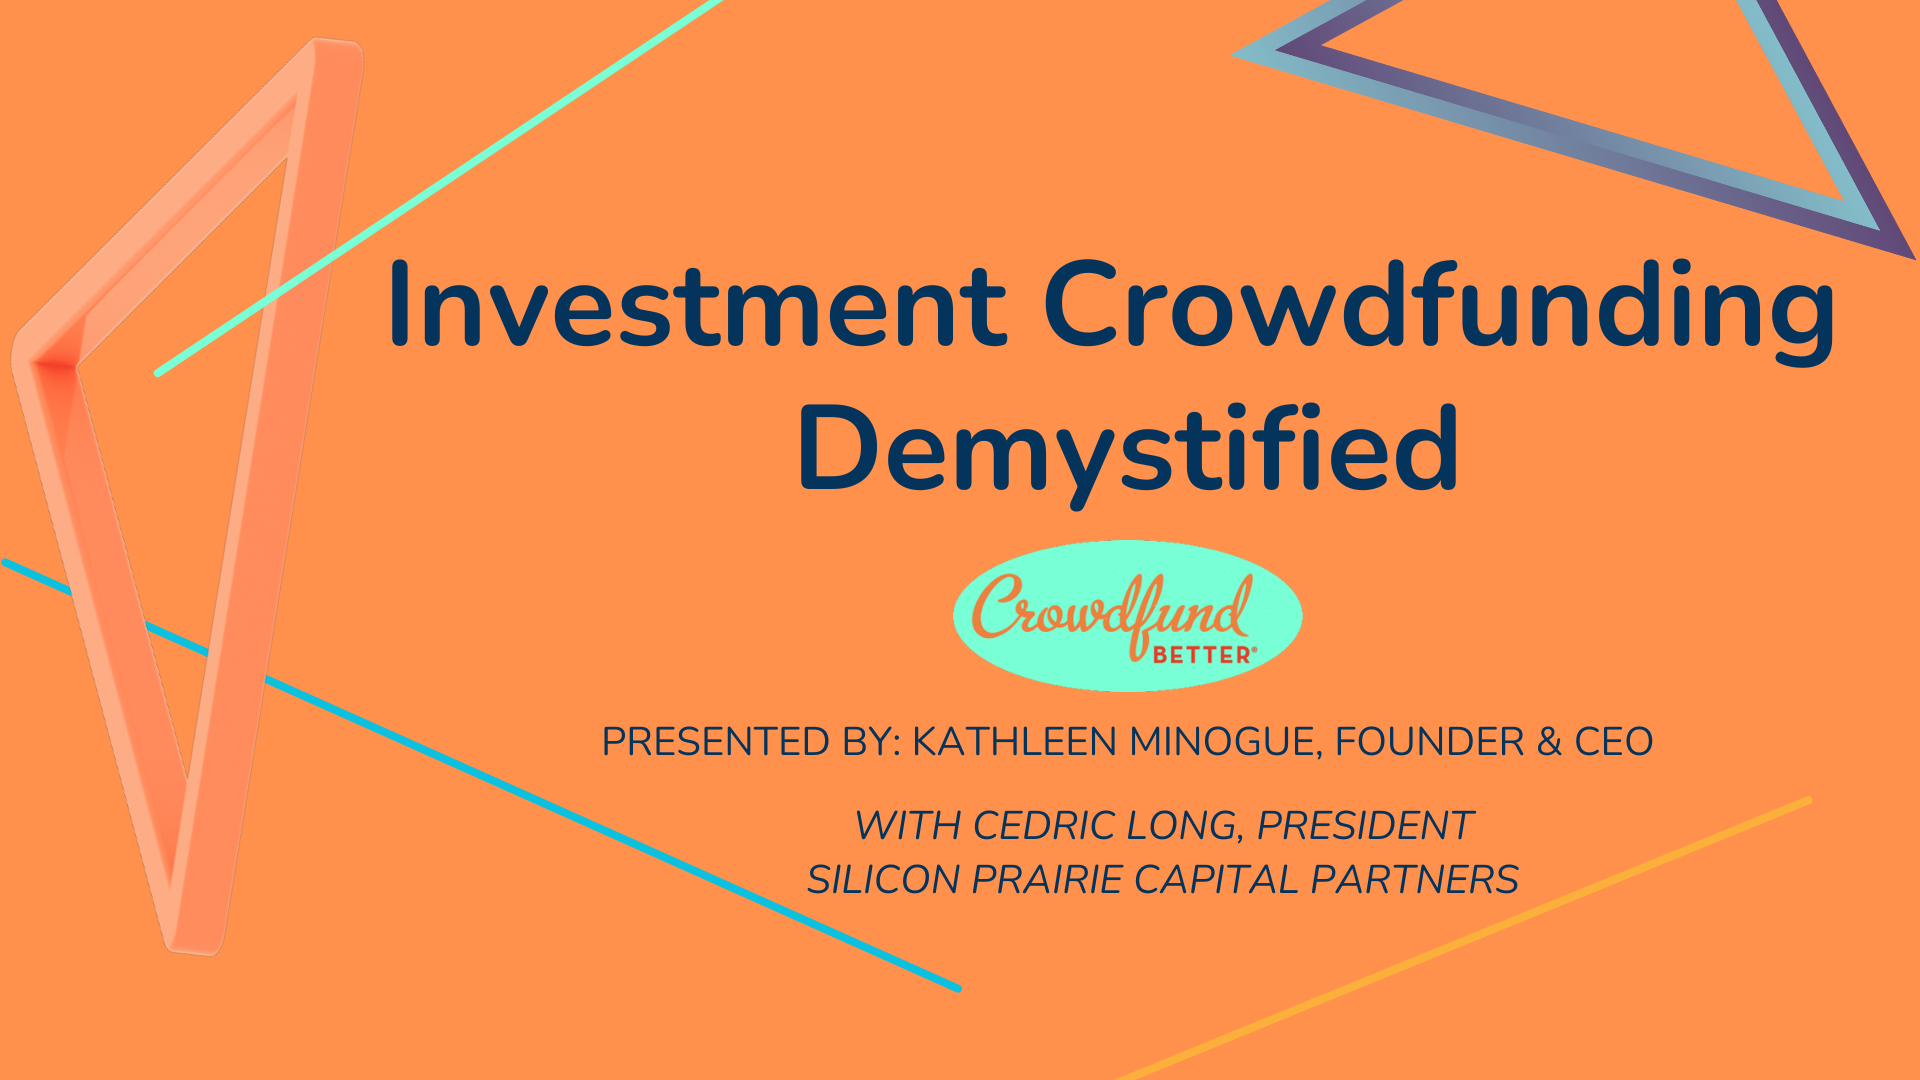 Investment Crowdfunding Demystified event cover photo